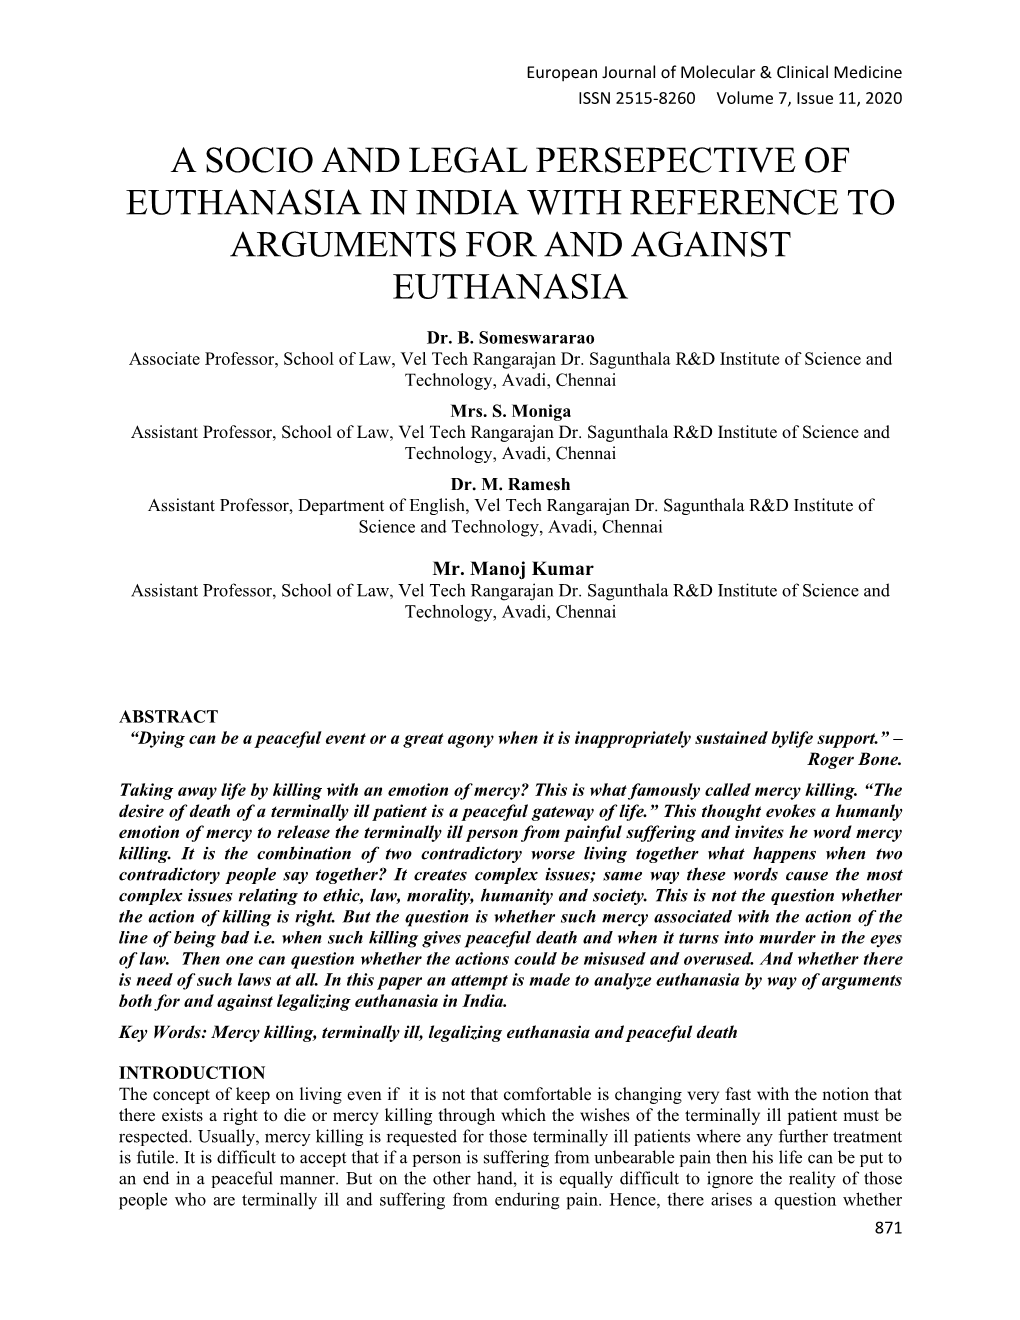 A Socio and Legal Persepective of Euthanasia in India with Reference to Arguments for and Against Euthanasia